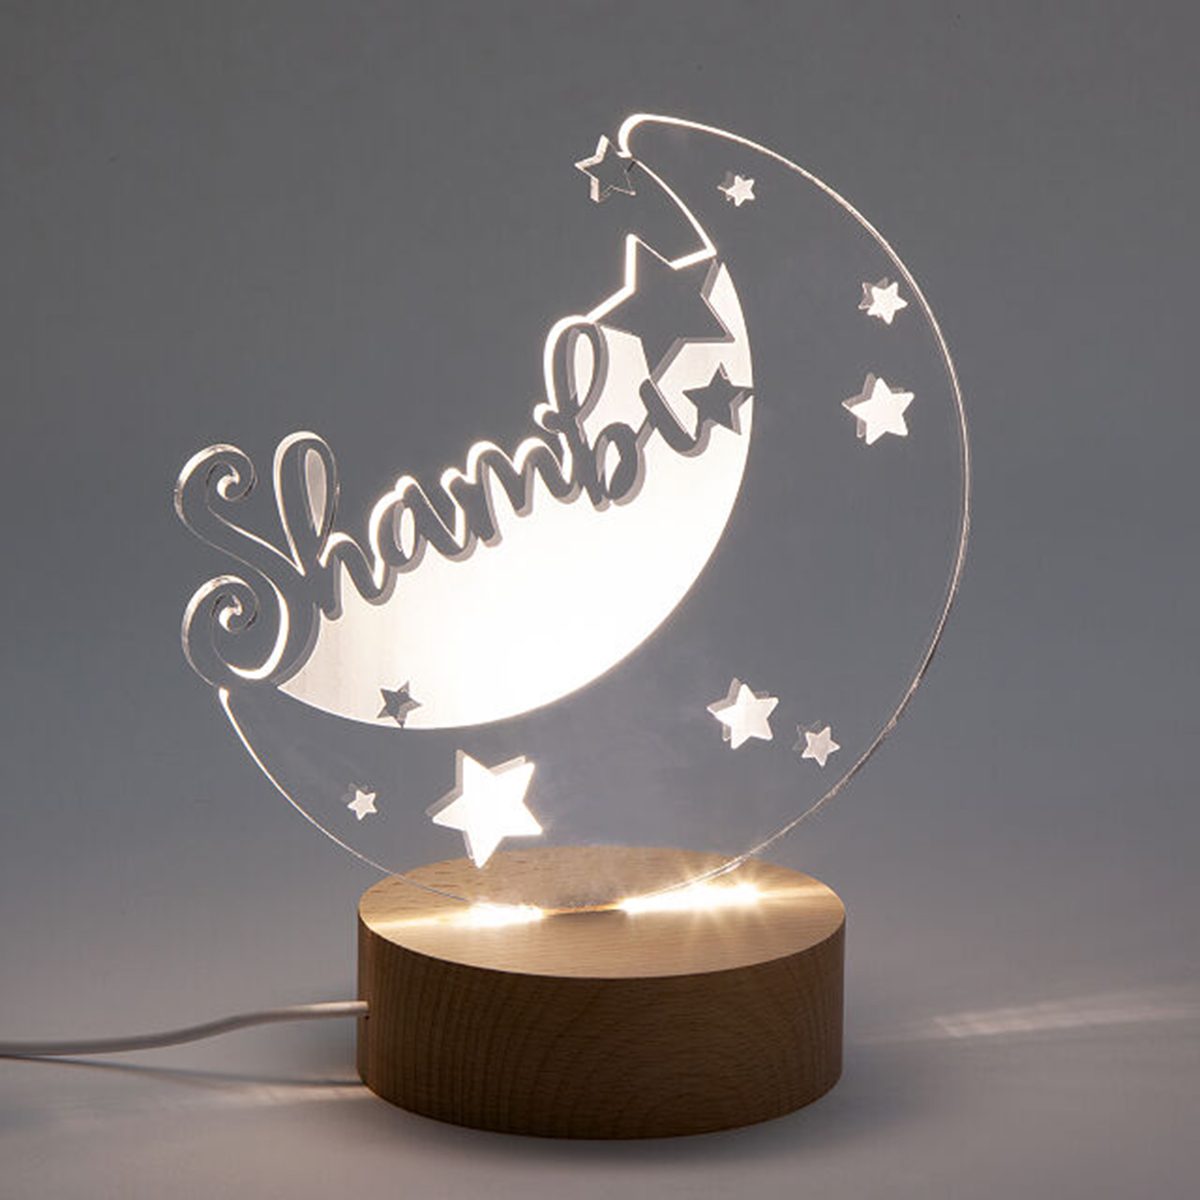 back to school gifts for kids Personalized Moon Stars Nightlight